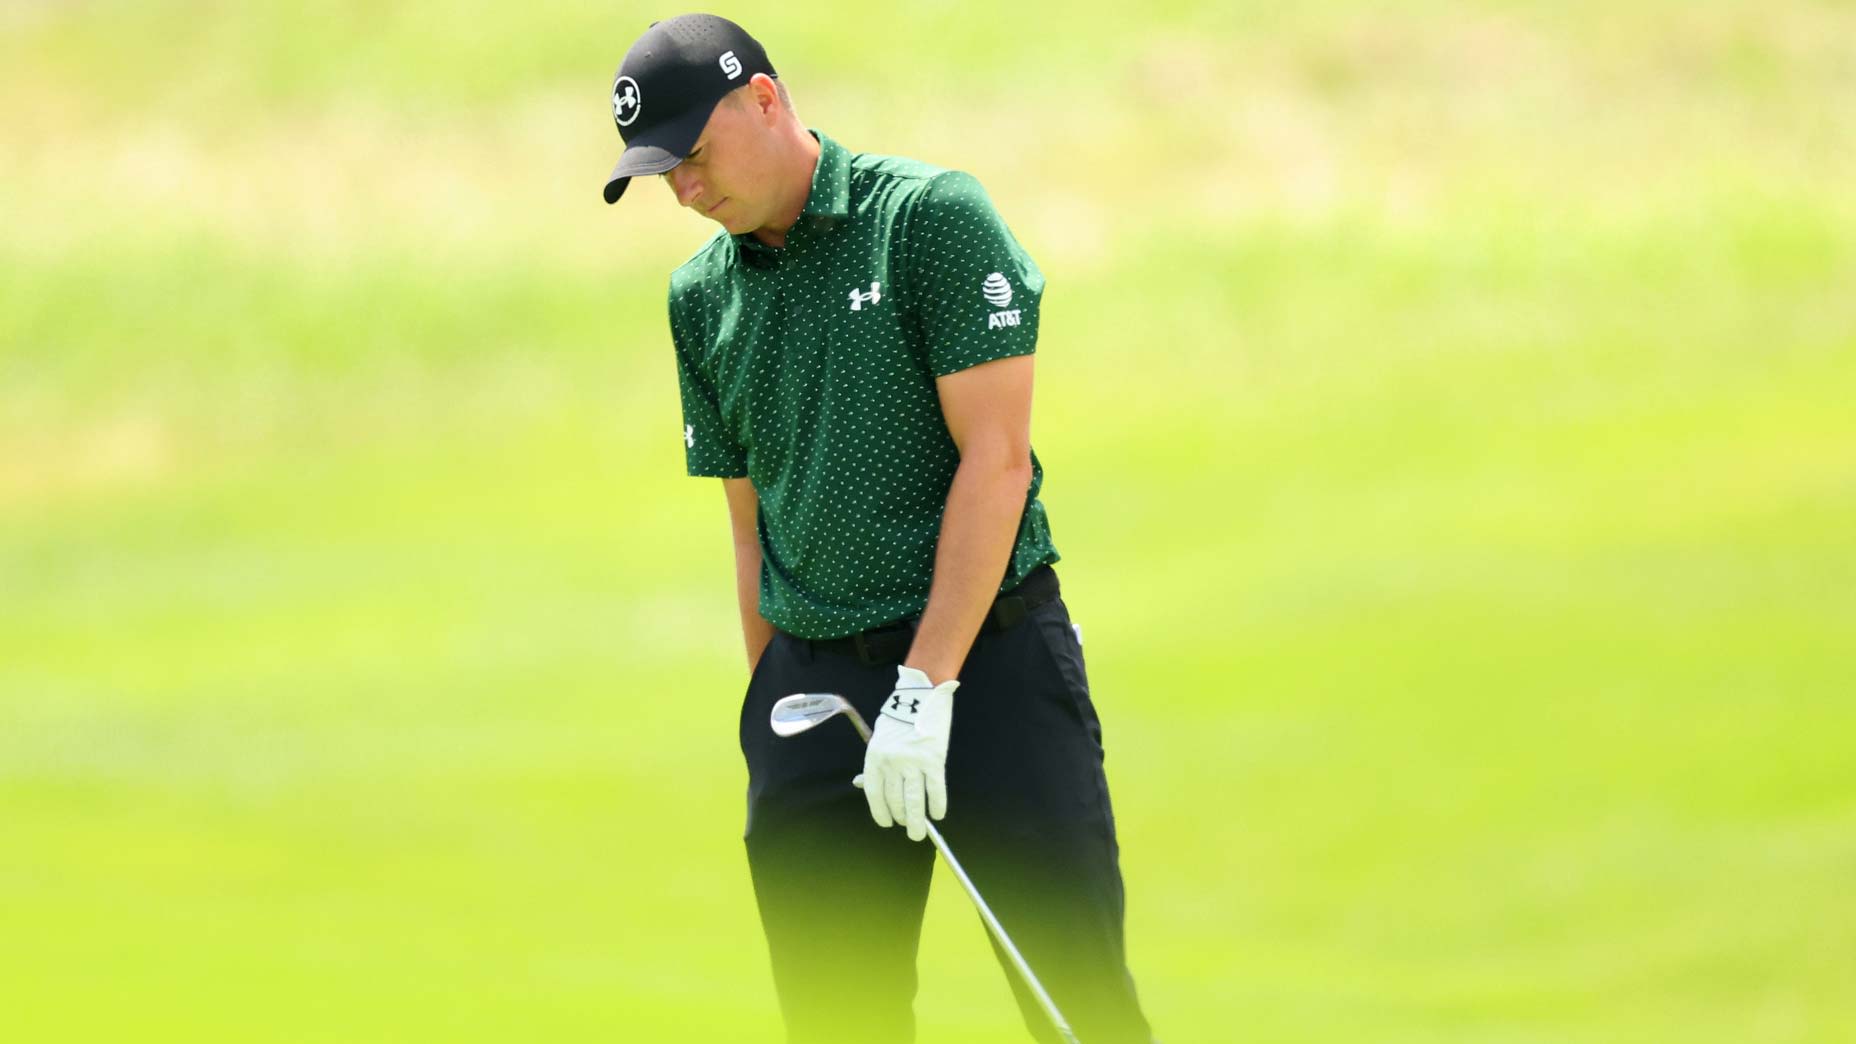 Jordan Spieth's hot round derailed by 1 bad decision. He stood by it